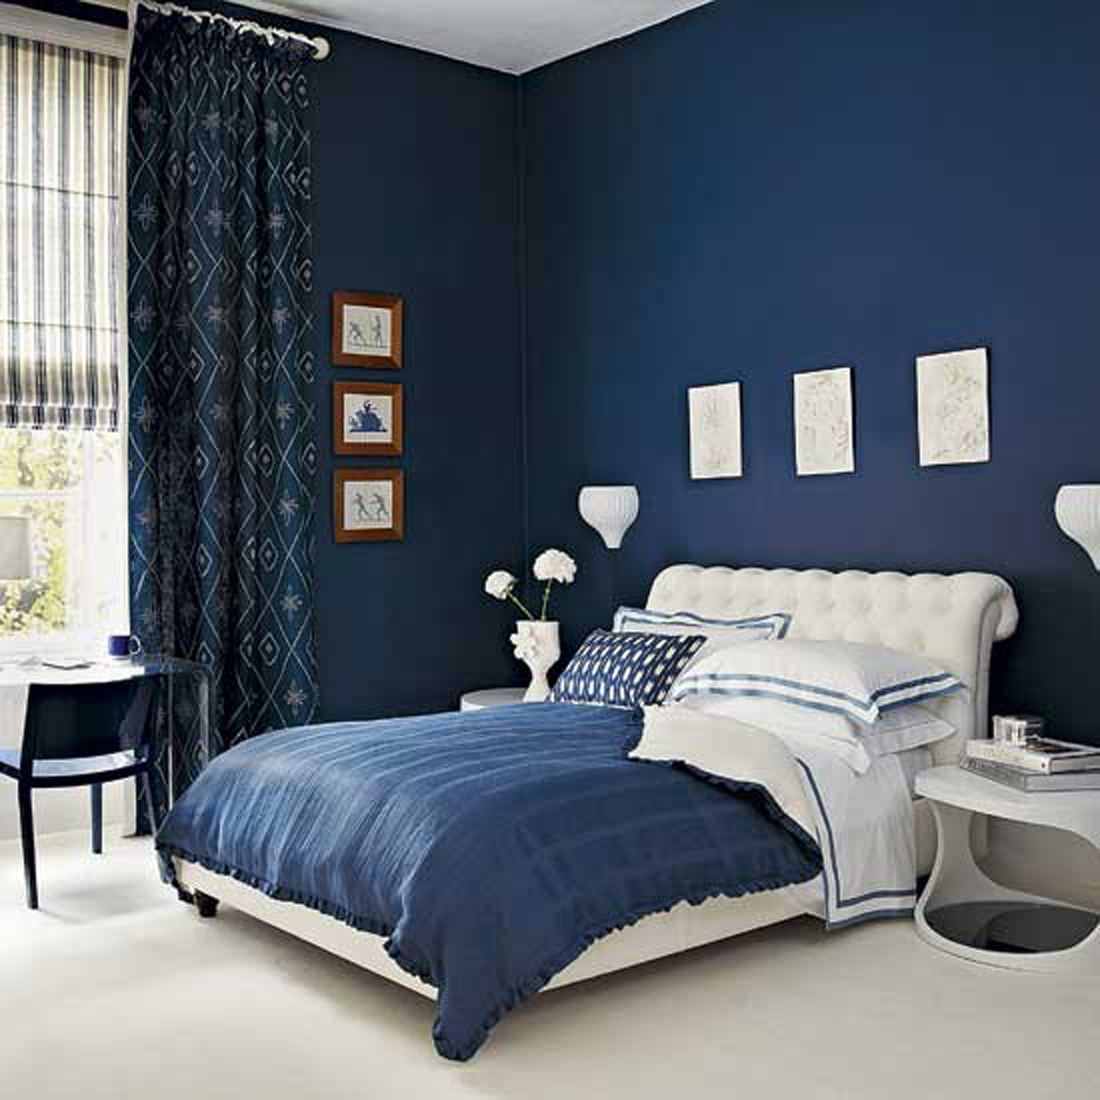 Blue And White Striped Walls